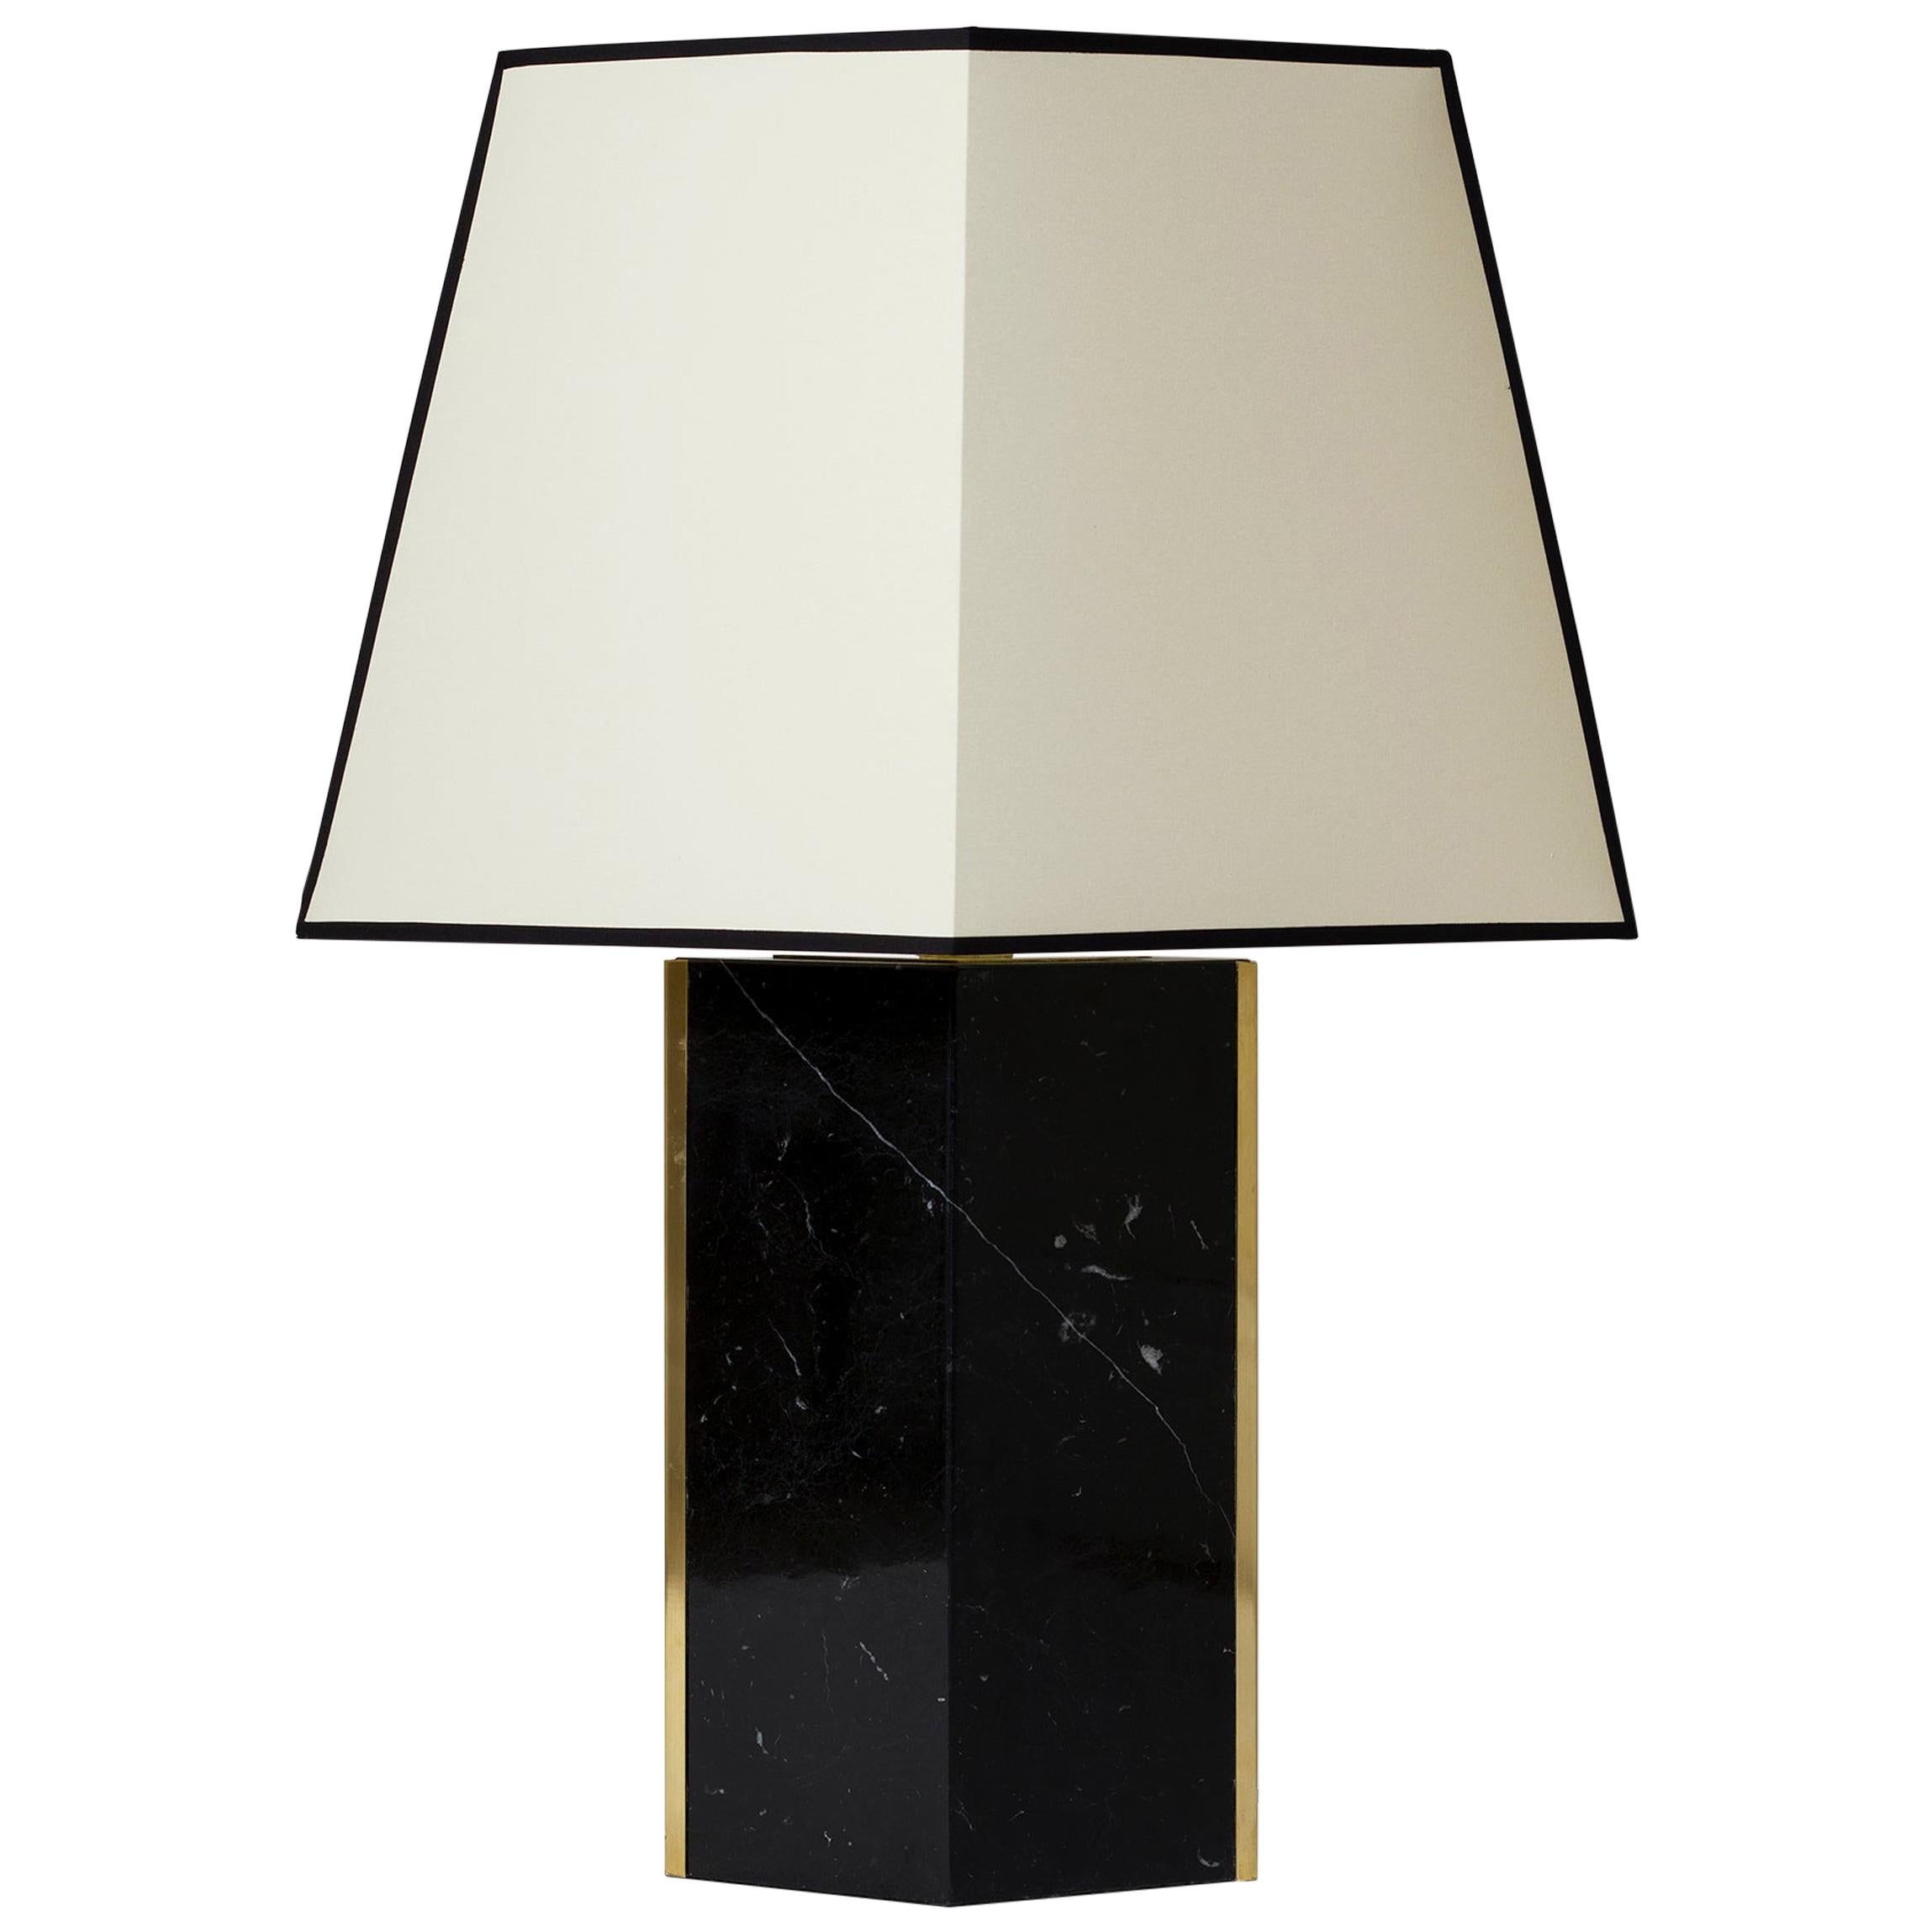 'Marine' Black Marble and Brass Table Lamp, by Dorian Caffot de Fawes